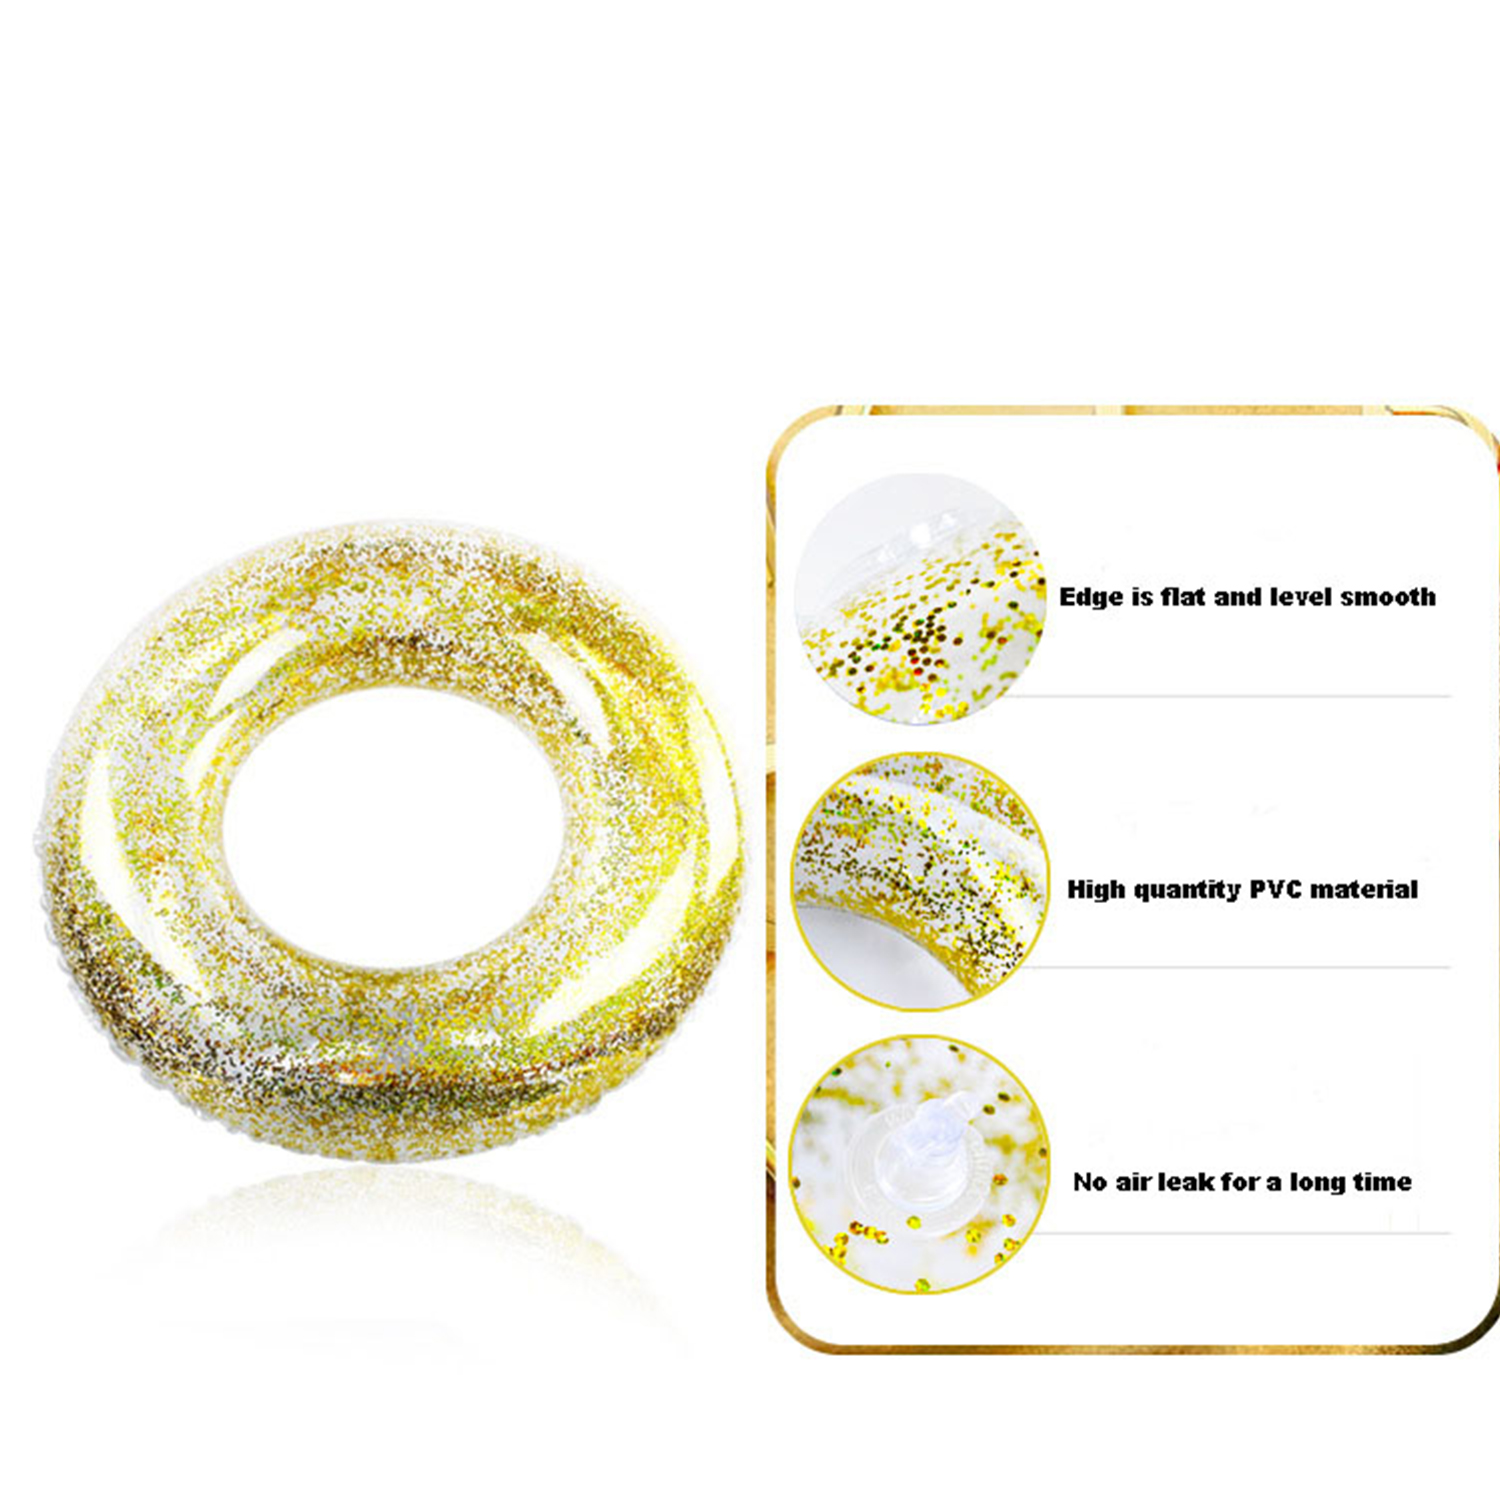 &nbsp;Glitter Swim Ring - Extra Large for The Pool Beach or Lake-Kids Teens Adults Glitter Inside Sparkles and Shines in The Sun - The Original Glitter Inflatable Tube Floats - image 3 of 8